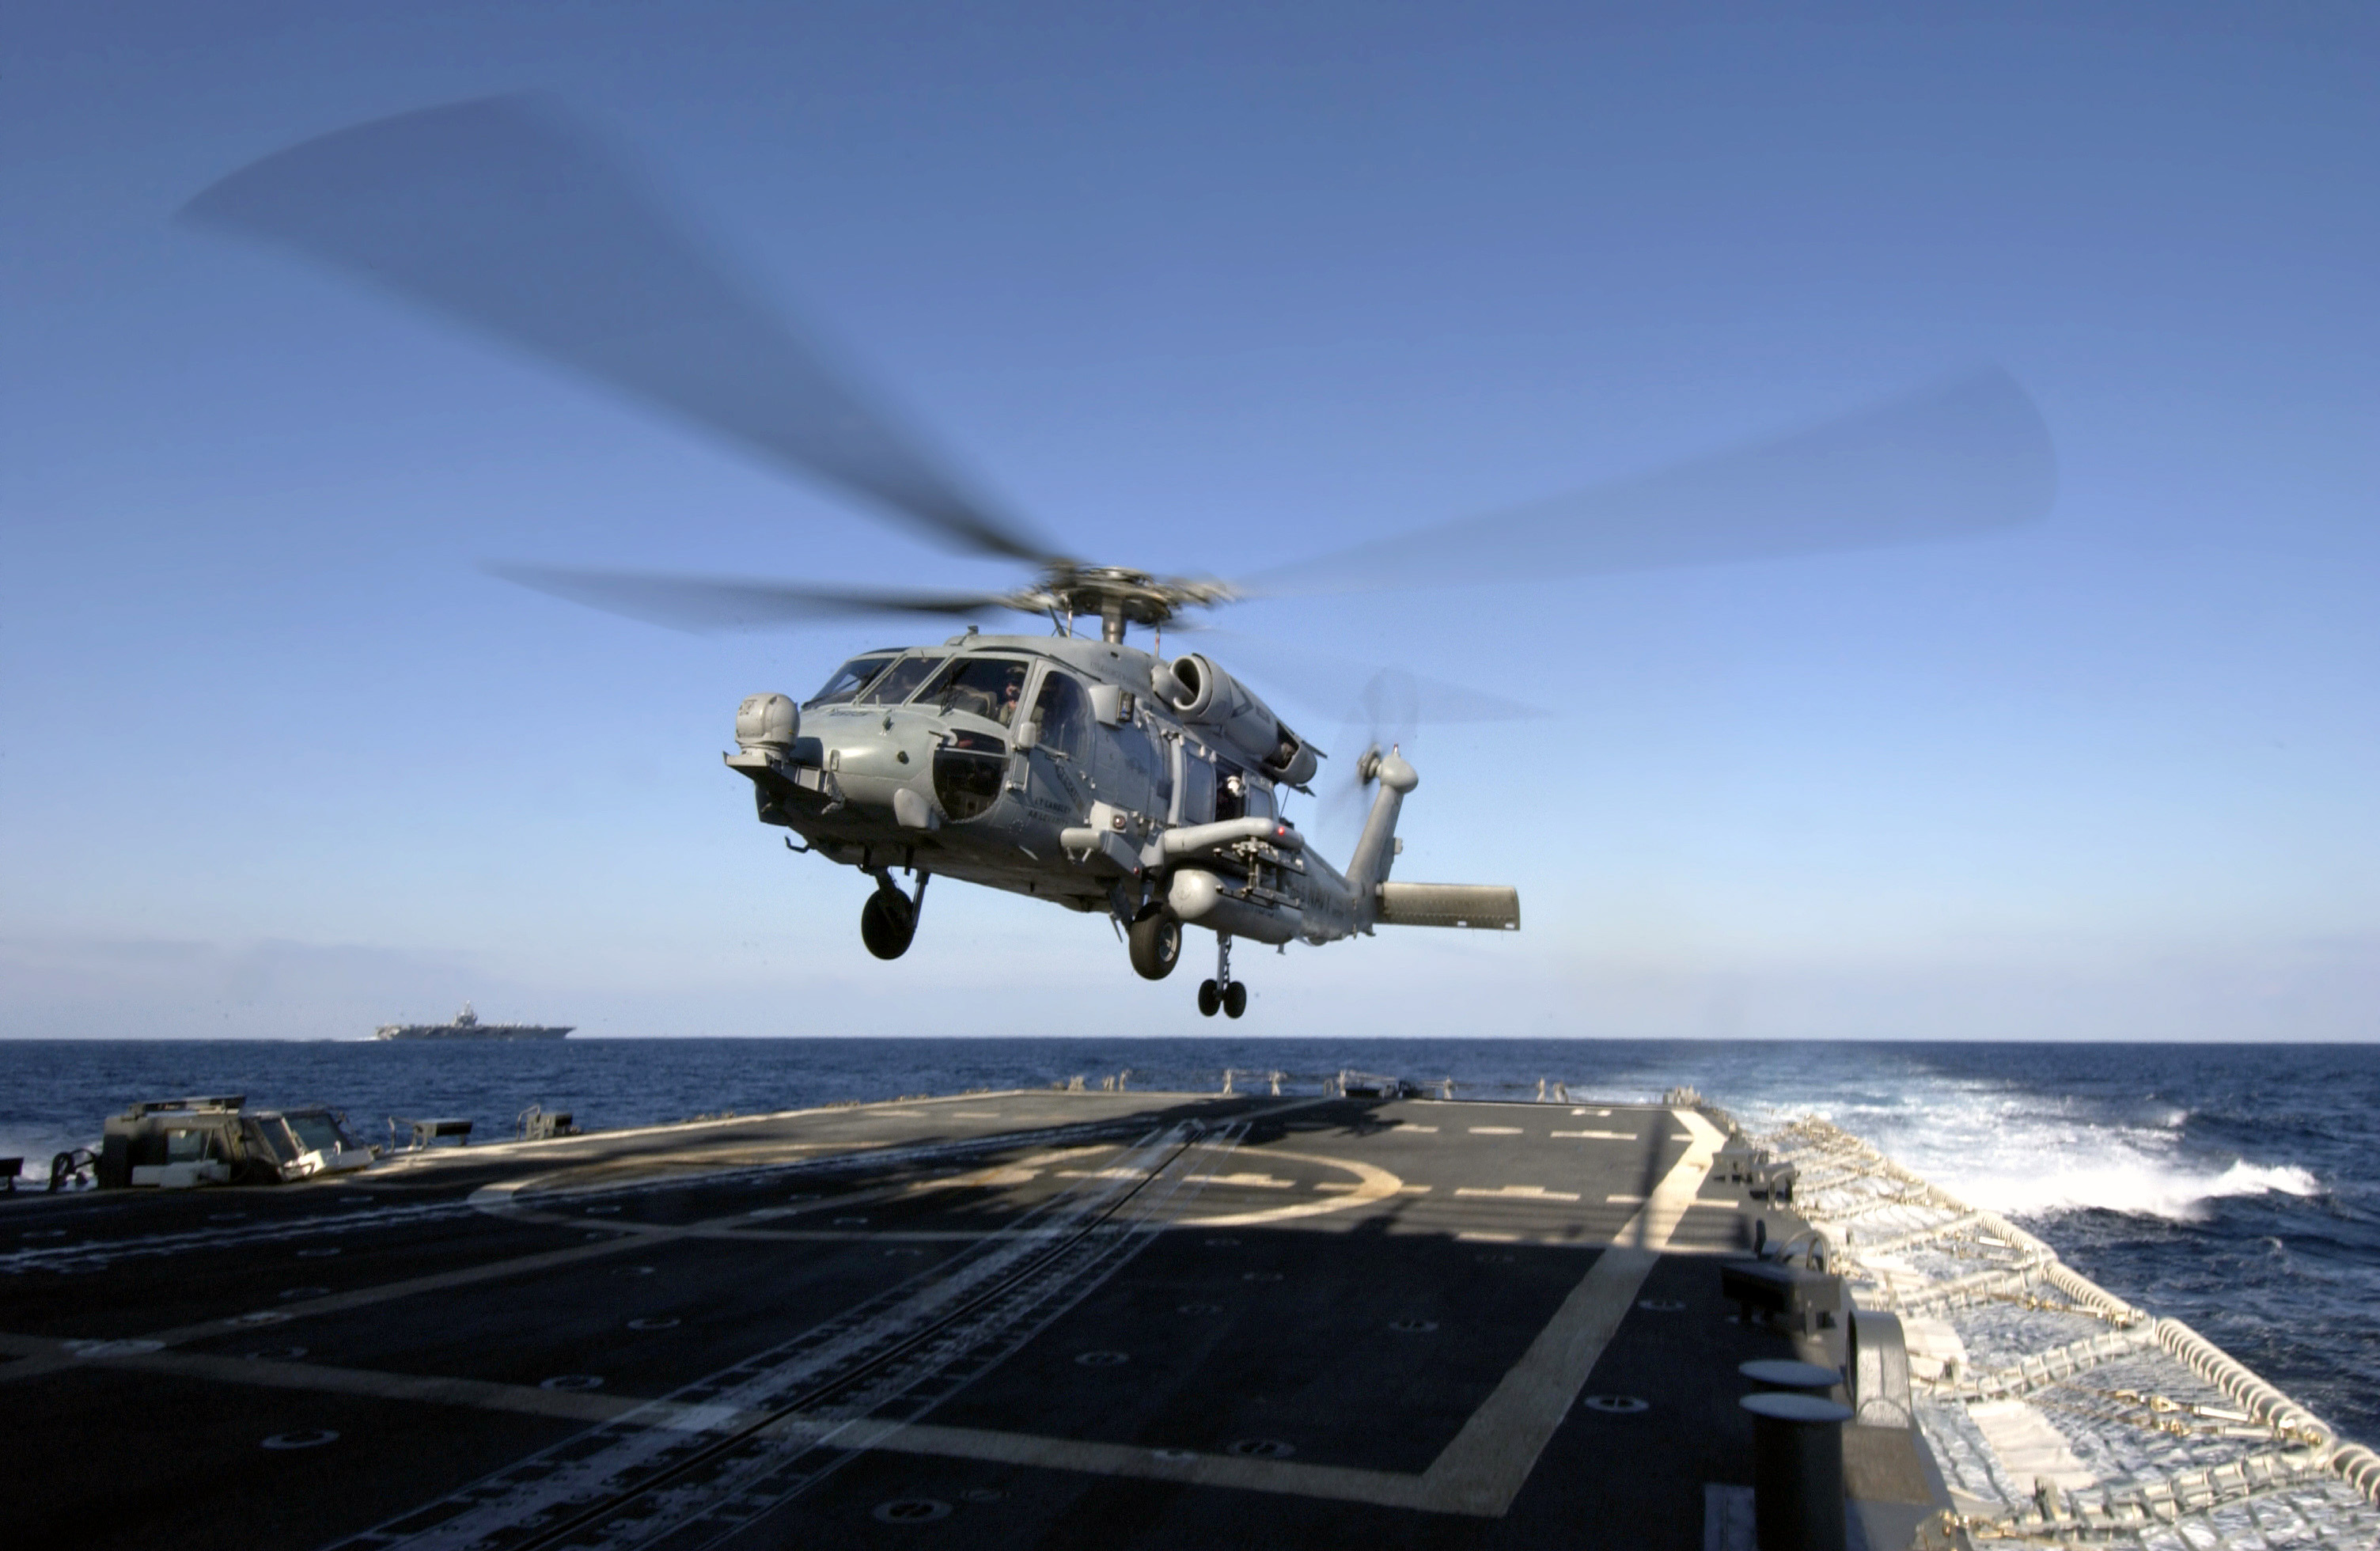 US Navy 031209-N-5319A-003 A HH-60H Seahawk helicopter assigned to ^ldquo,Nightdippers^rdquo, of Helicopter Anti-Submarine Squadron Five (HS-5) prepares to land on the flight deck